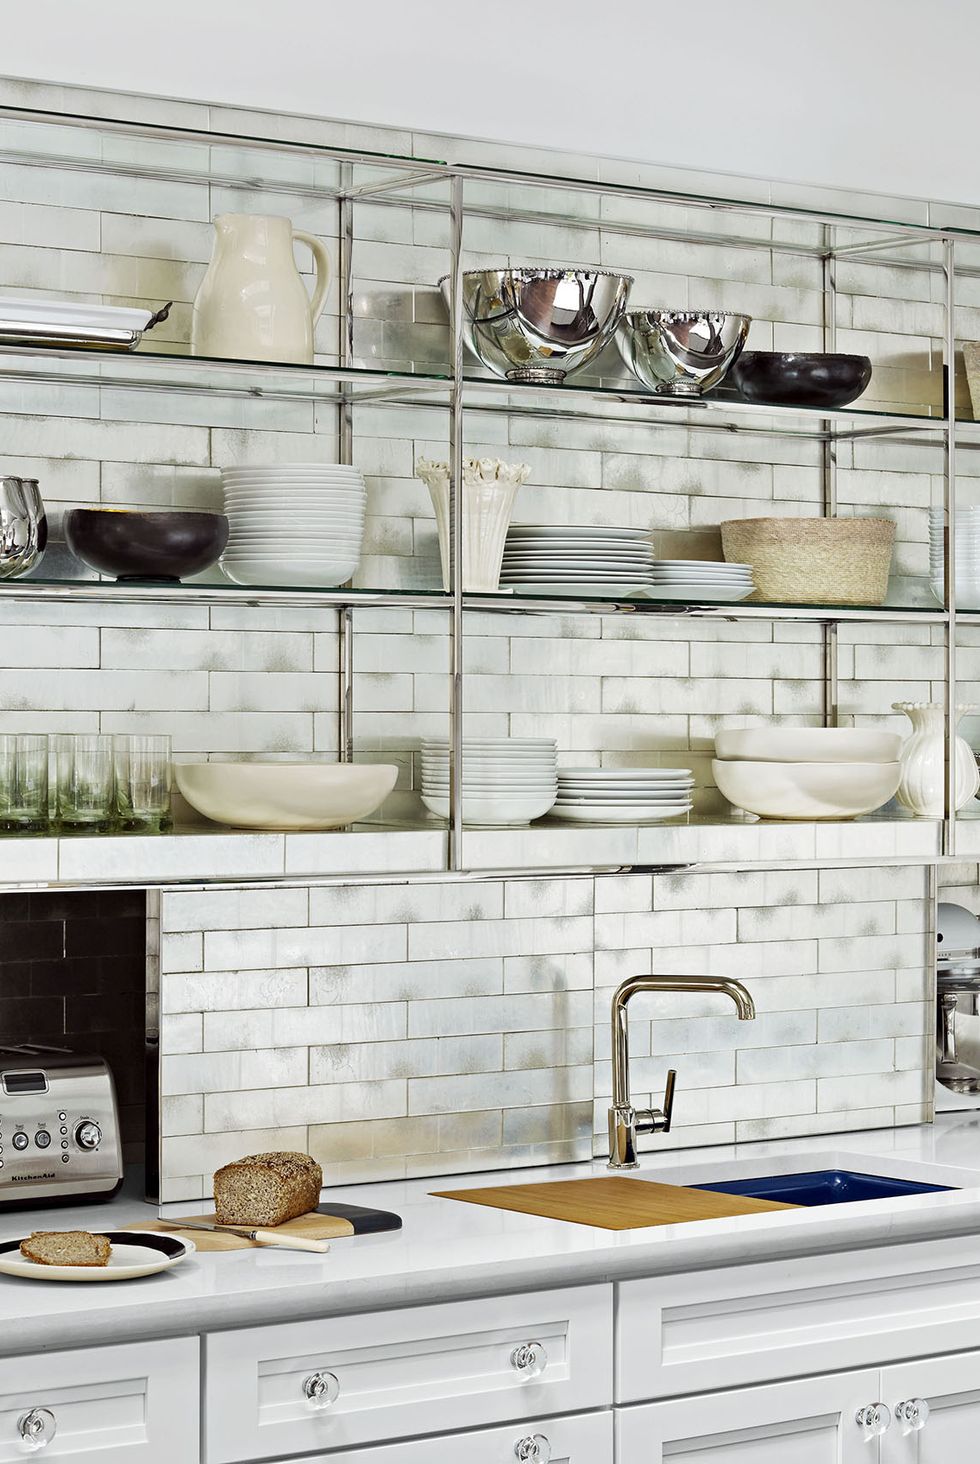 20 Kitchen Open Shelf Ideas - How to Use Open Shelving in Kitchens